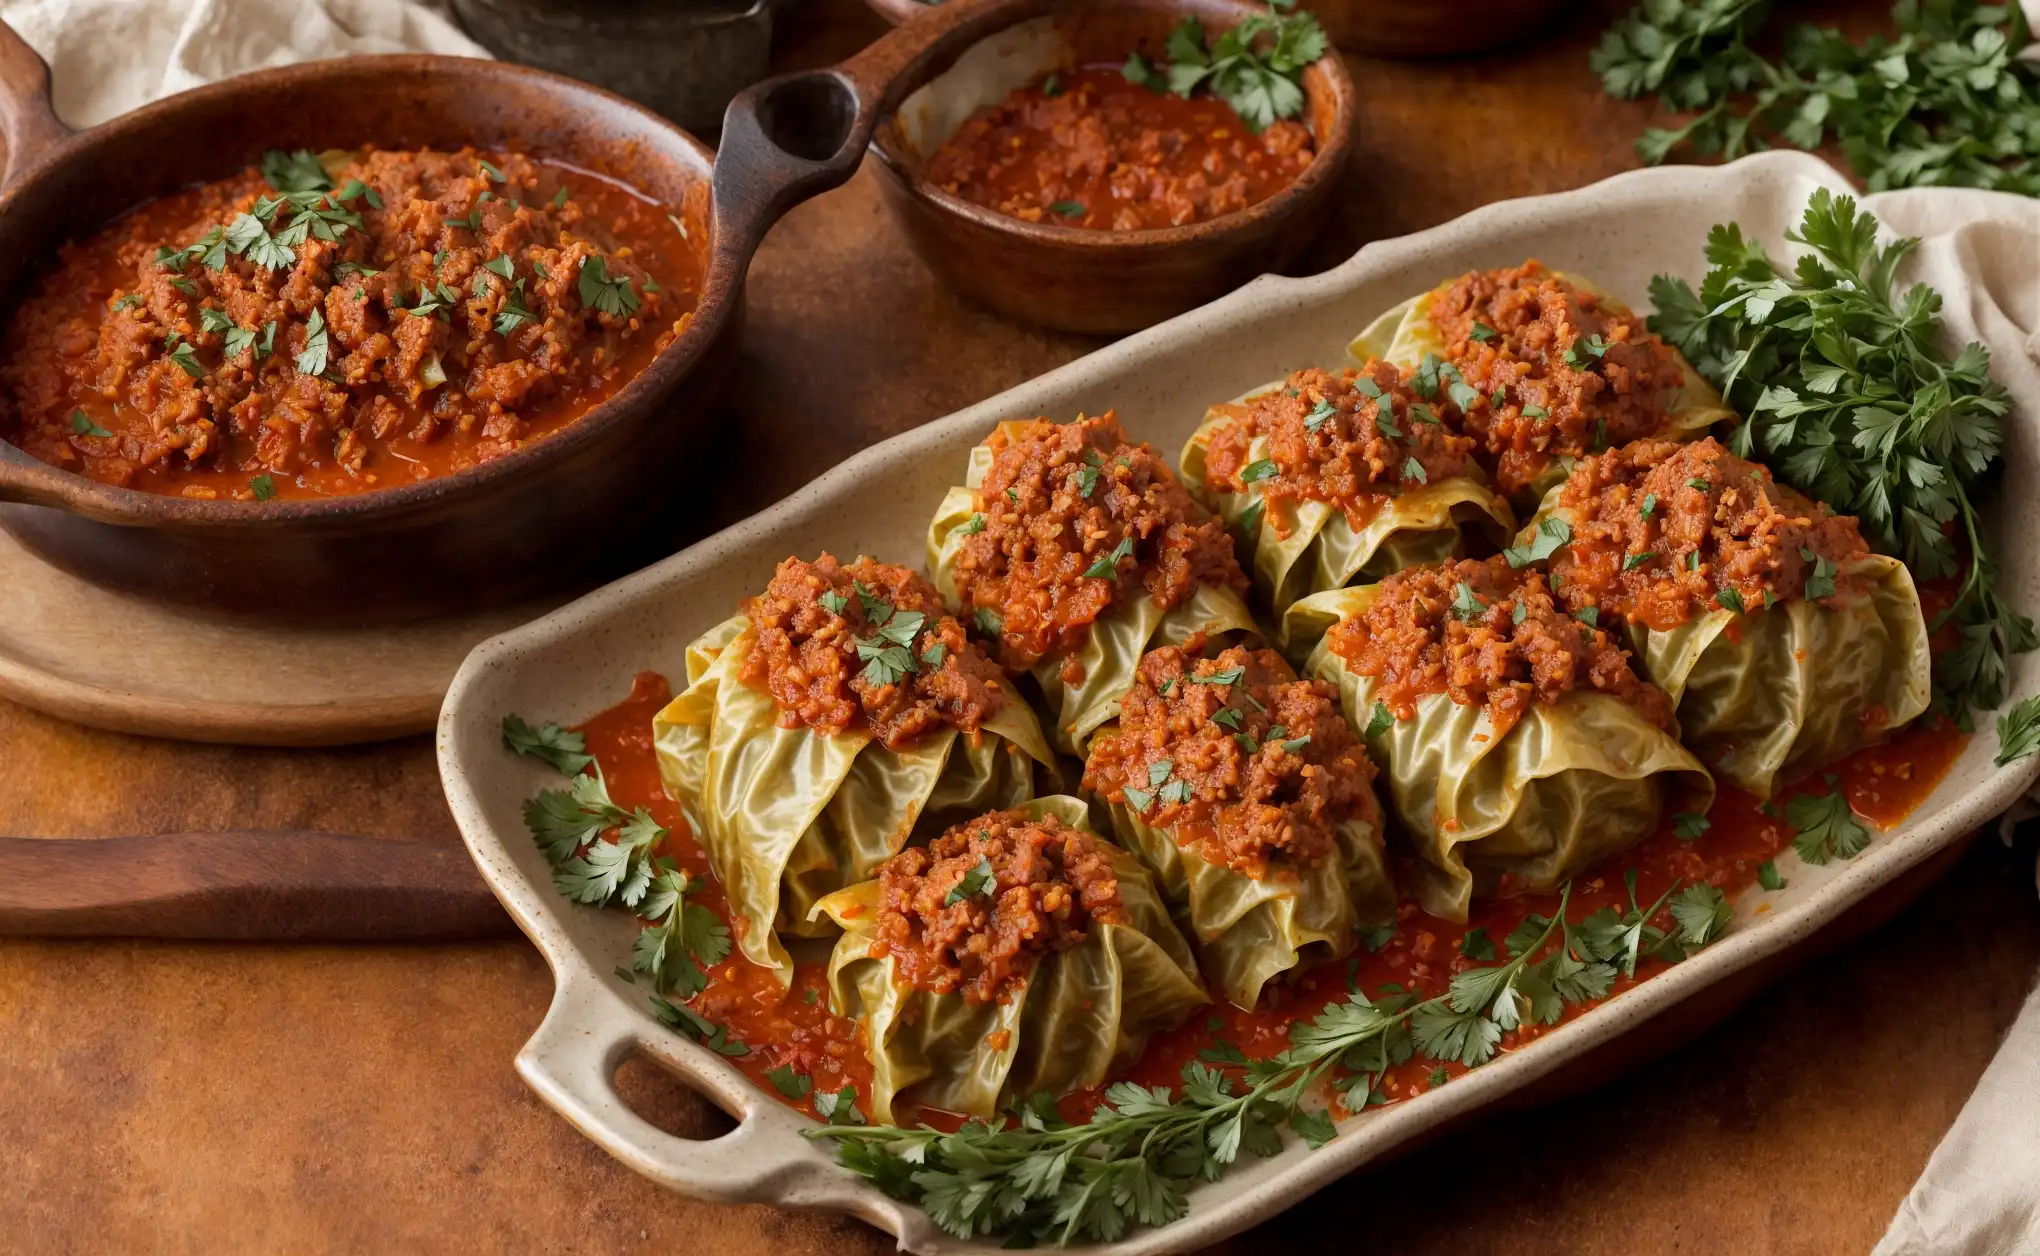 Where to Buy Stuffed Cabbage